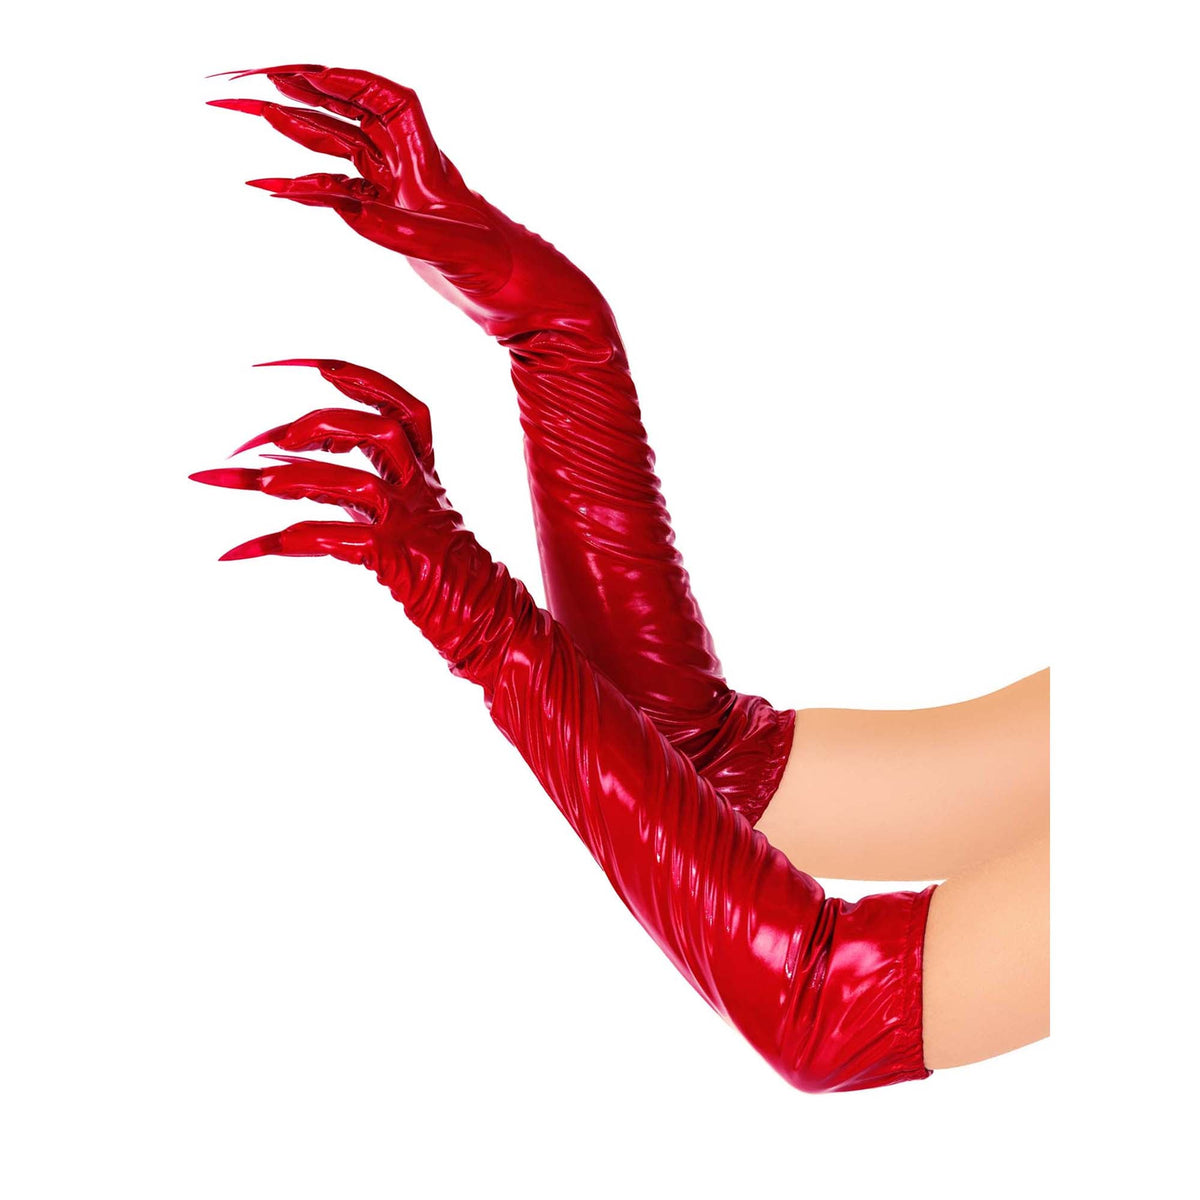 LEG AVENUE/SKU DISTRIBUTORS INC Costume Accessories Red Vinyl Claw Gloves for Adults, 1 Count 714718566771